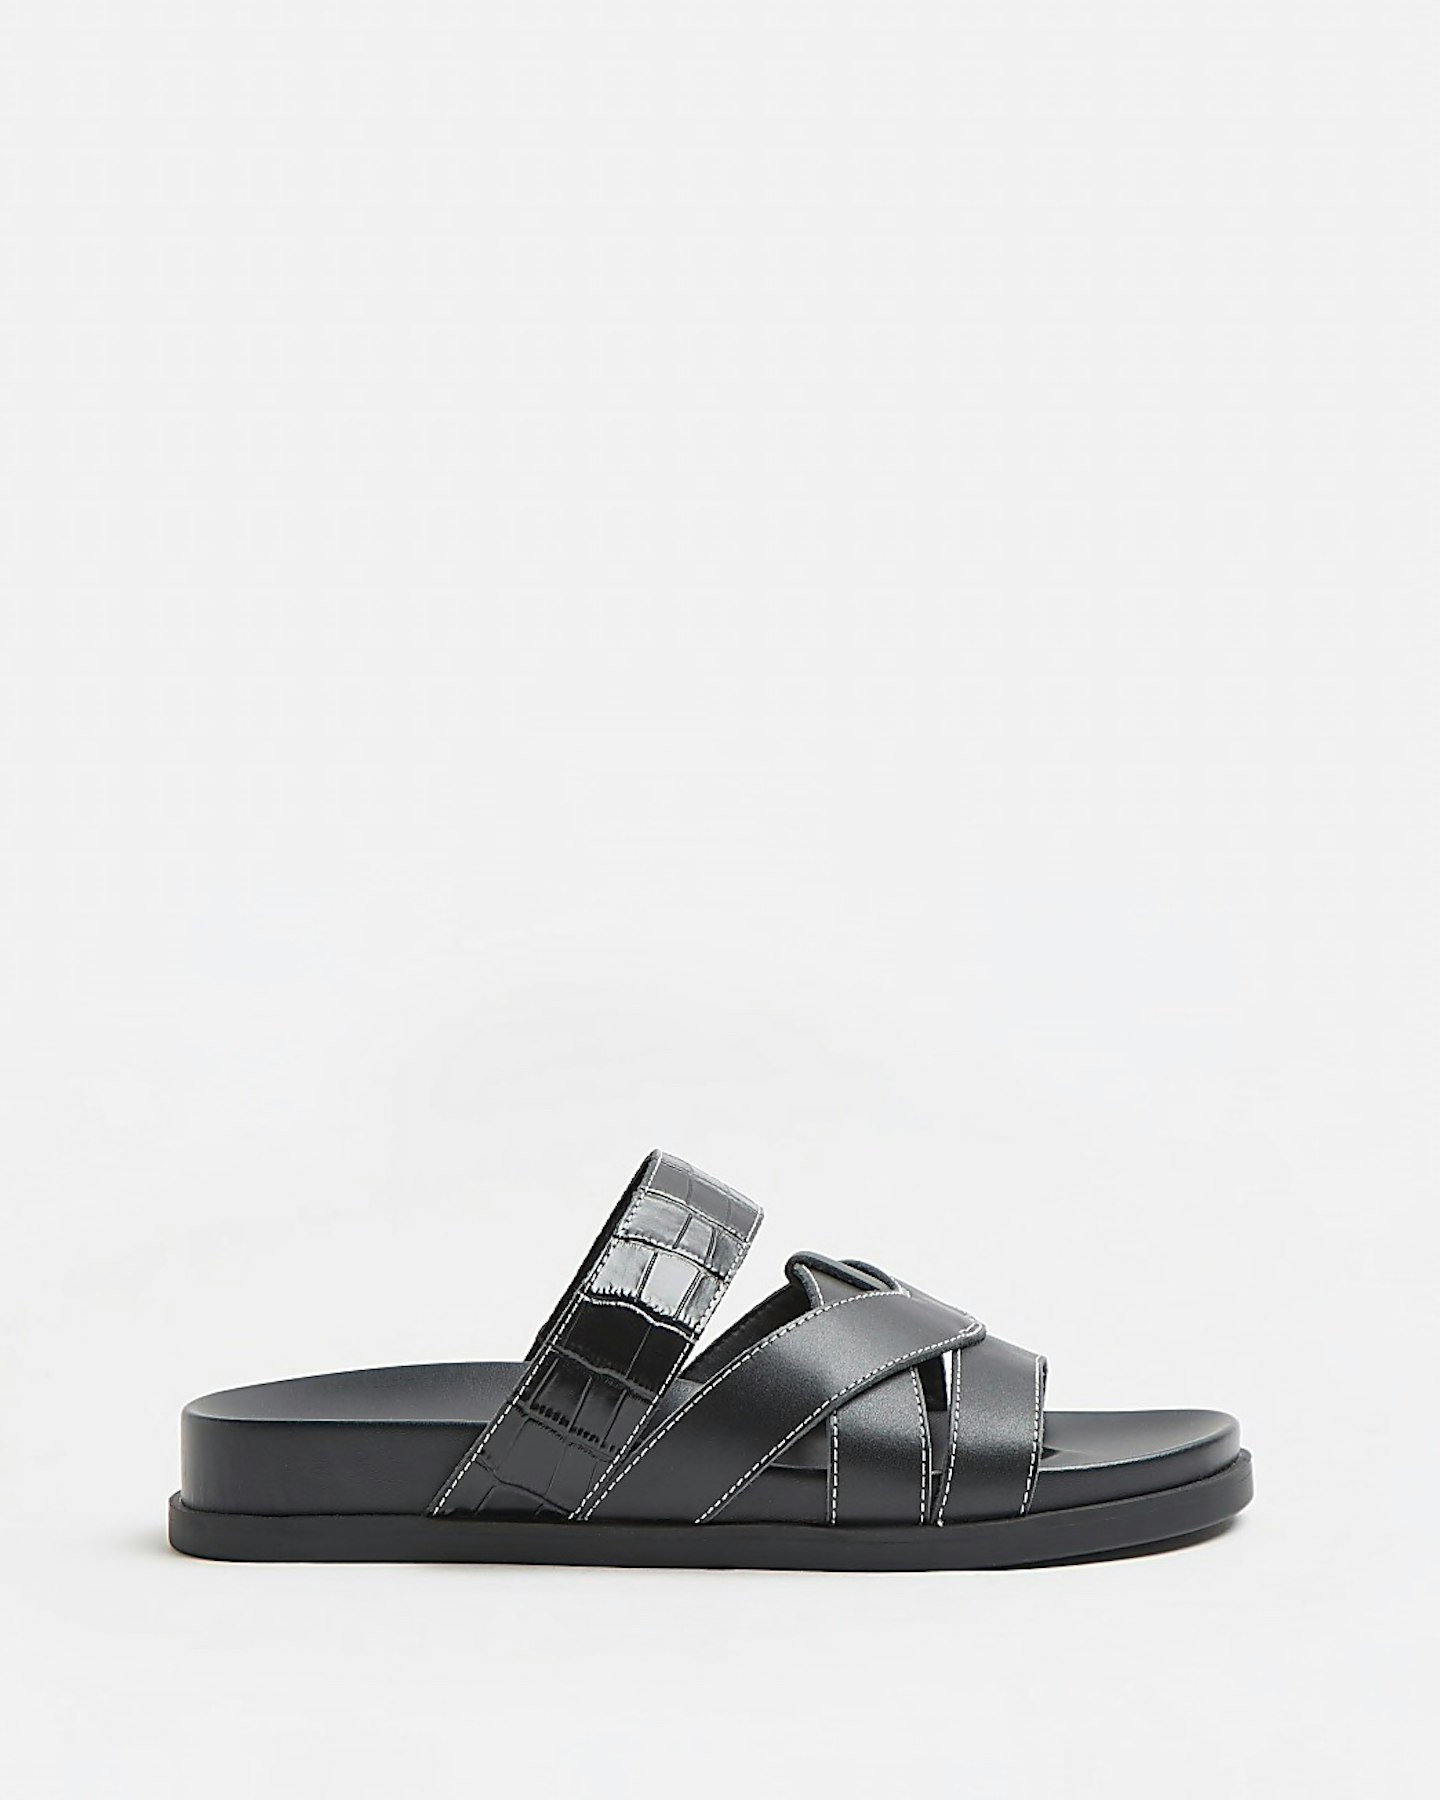 river island best buys Leather Cross Over Sandals, £50